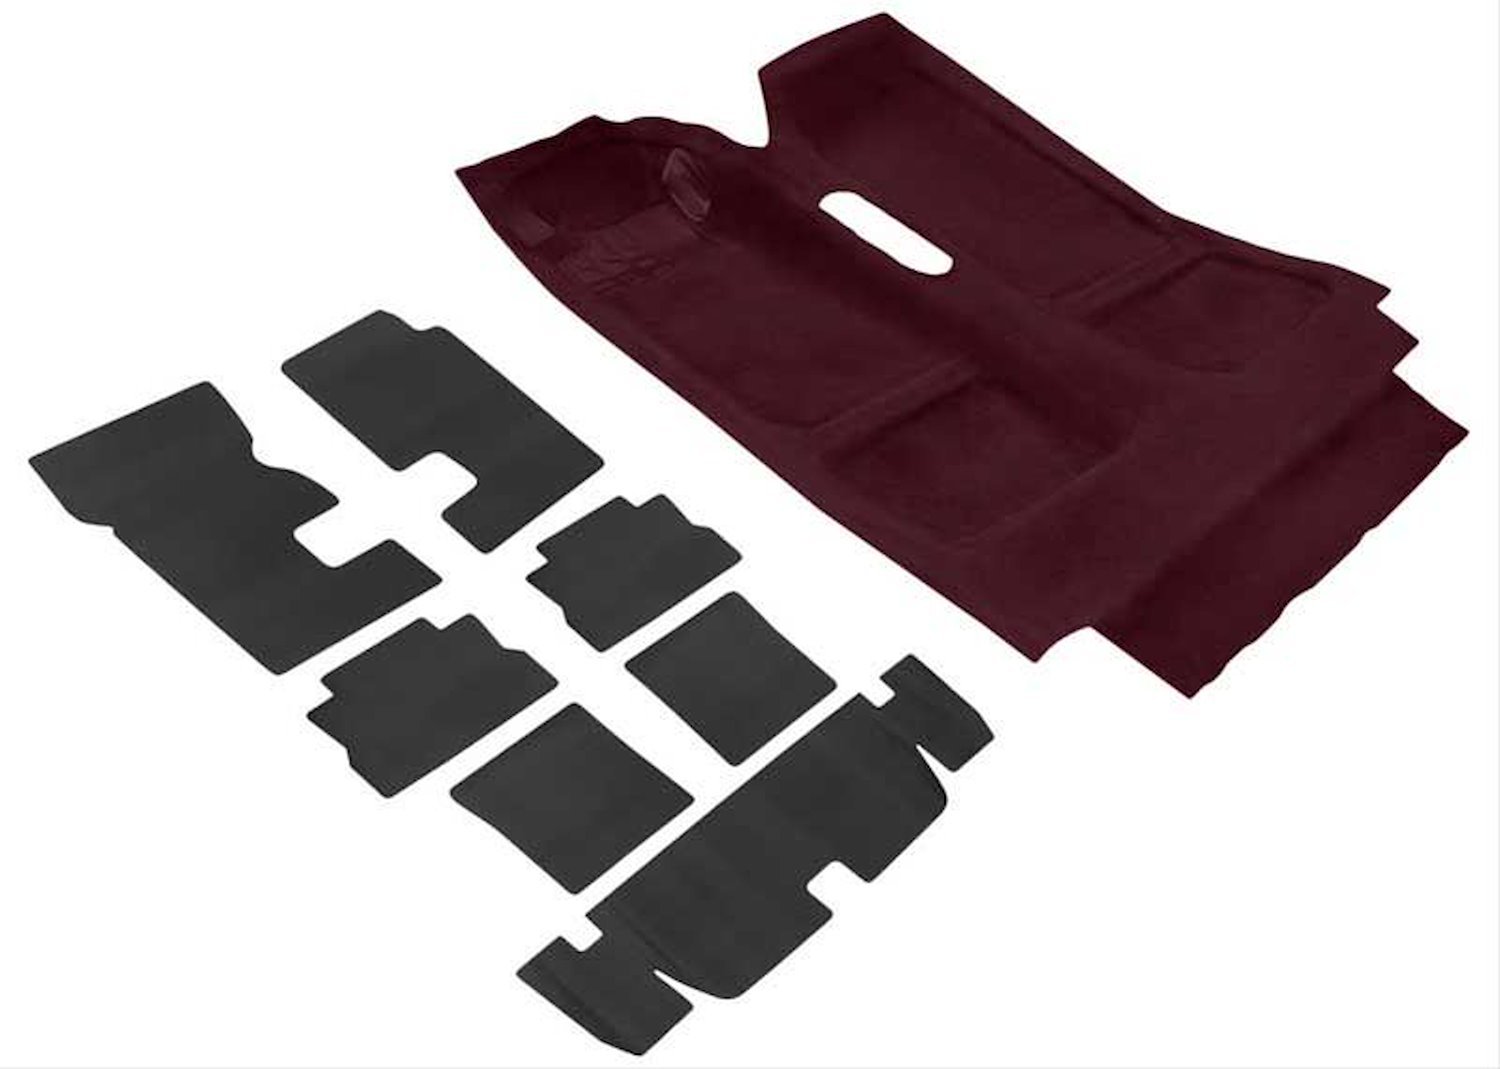 R2915 Passenger And Hatch Area Carpet And Underlay Set 1990 Camaro Maroon Cut Pile Passenger And Hatch Area Carpet And Underlay